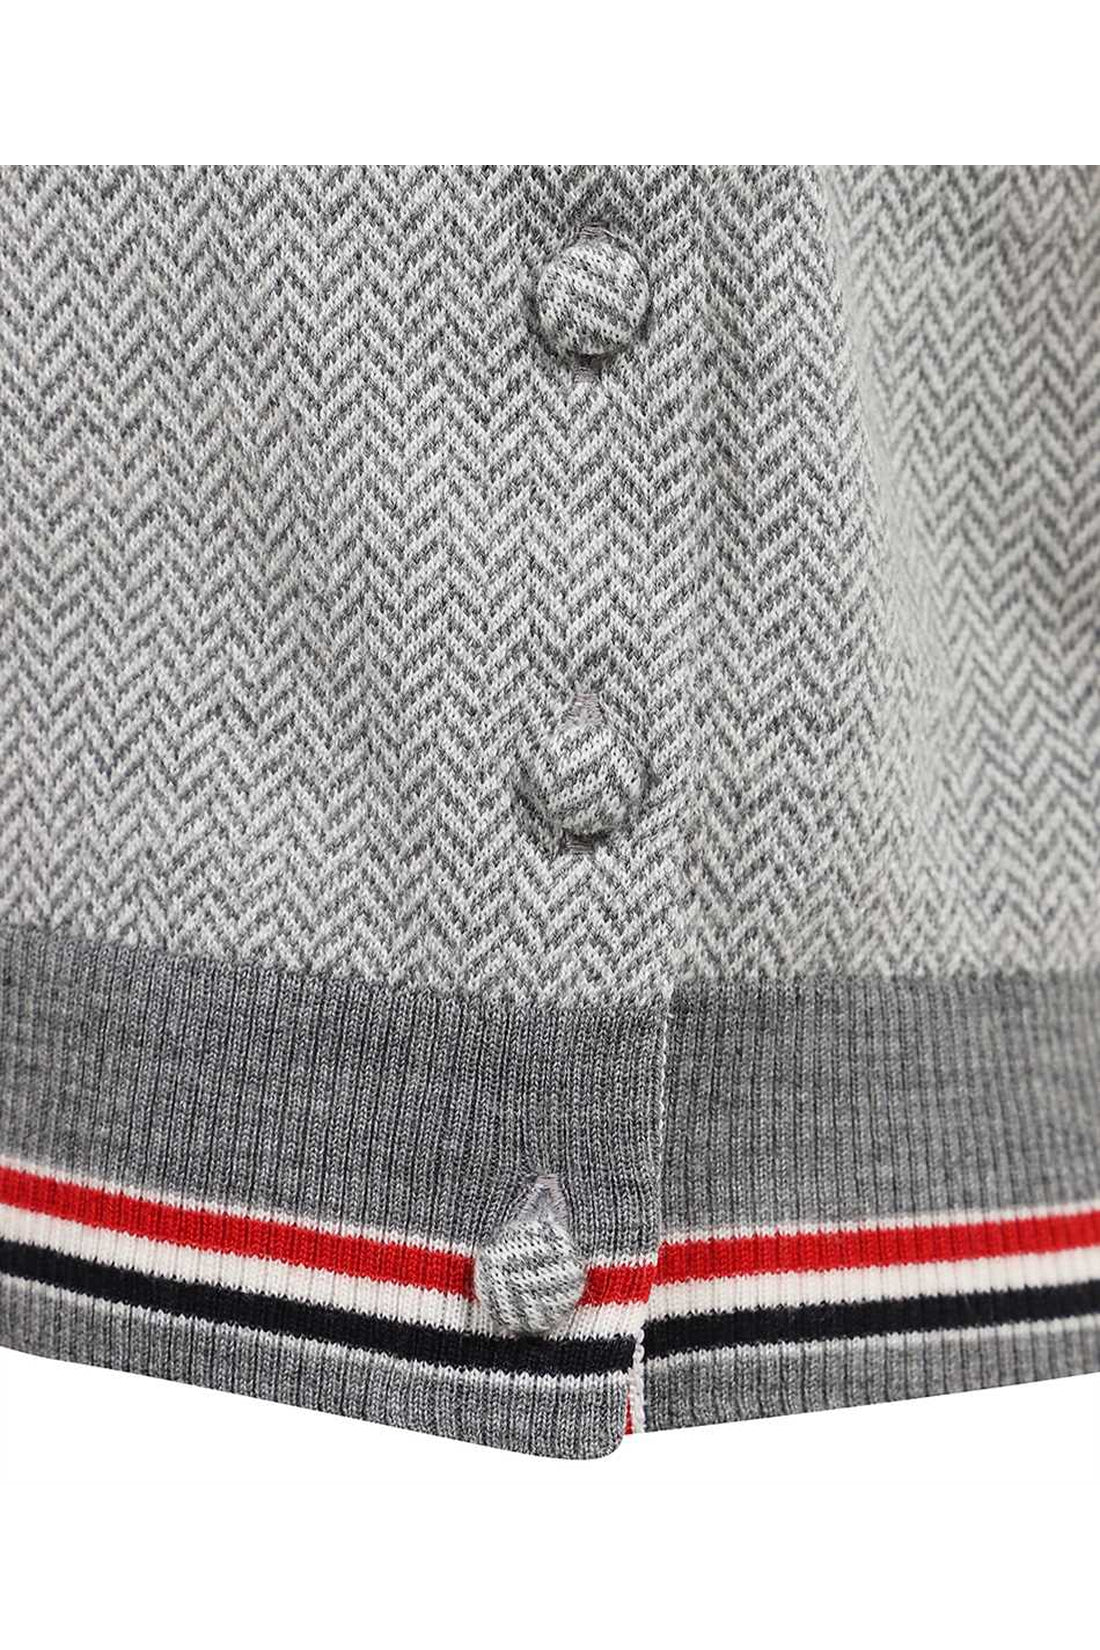 Thom Browne-OUTLET-SALE-Knitted top-ARCHIVIST